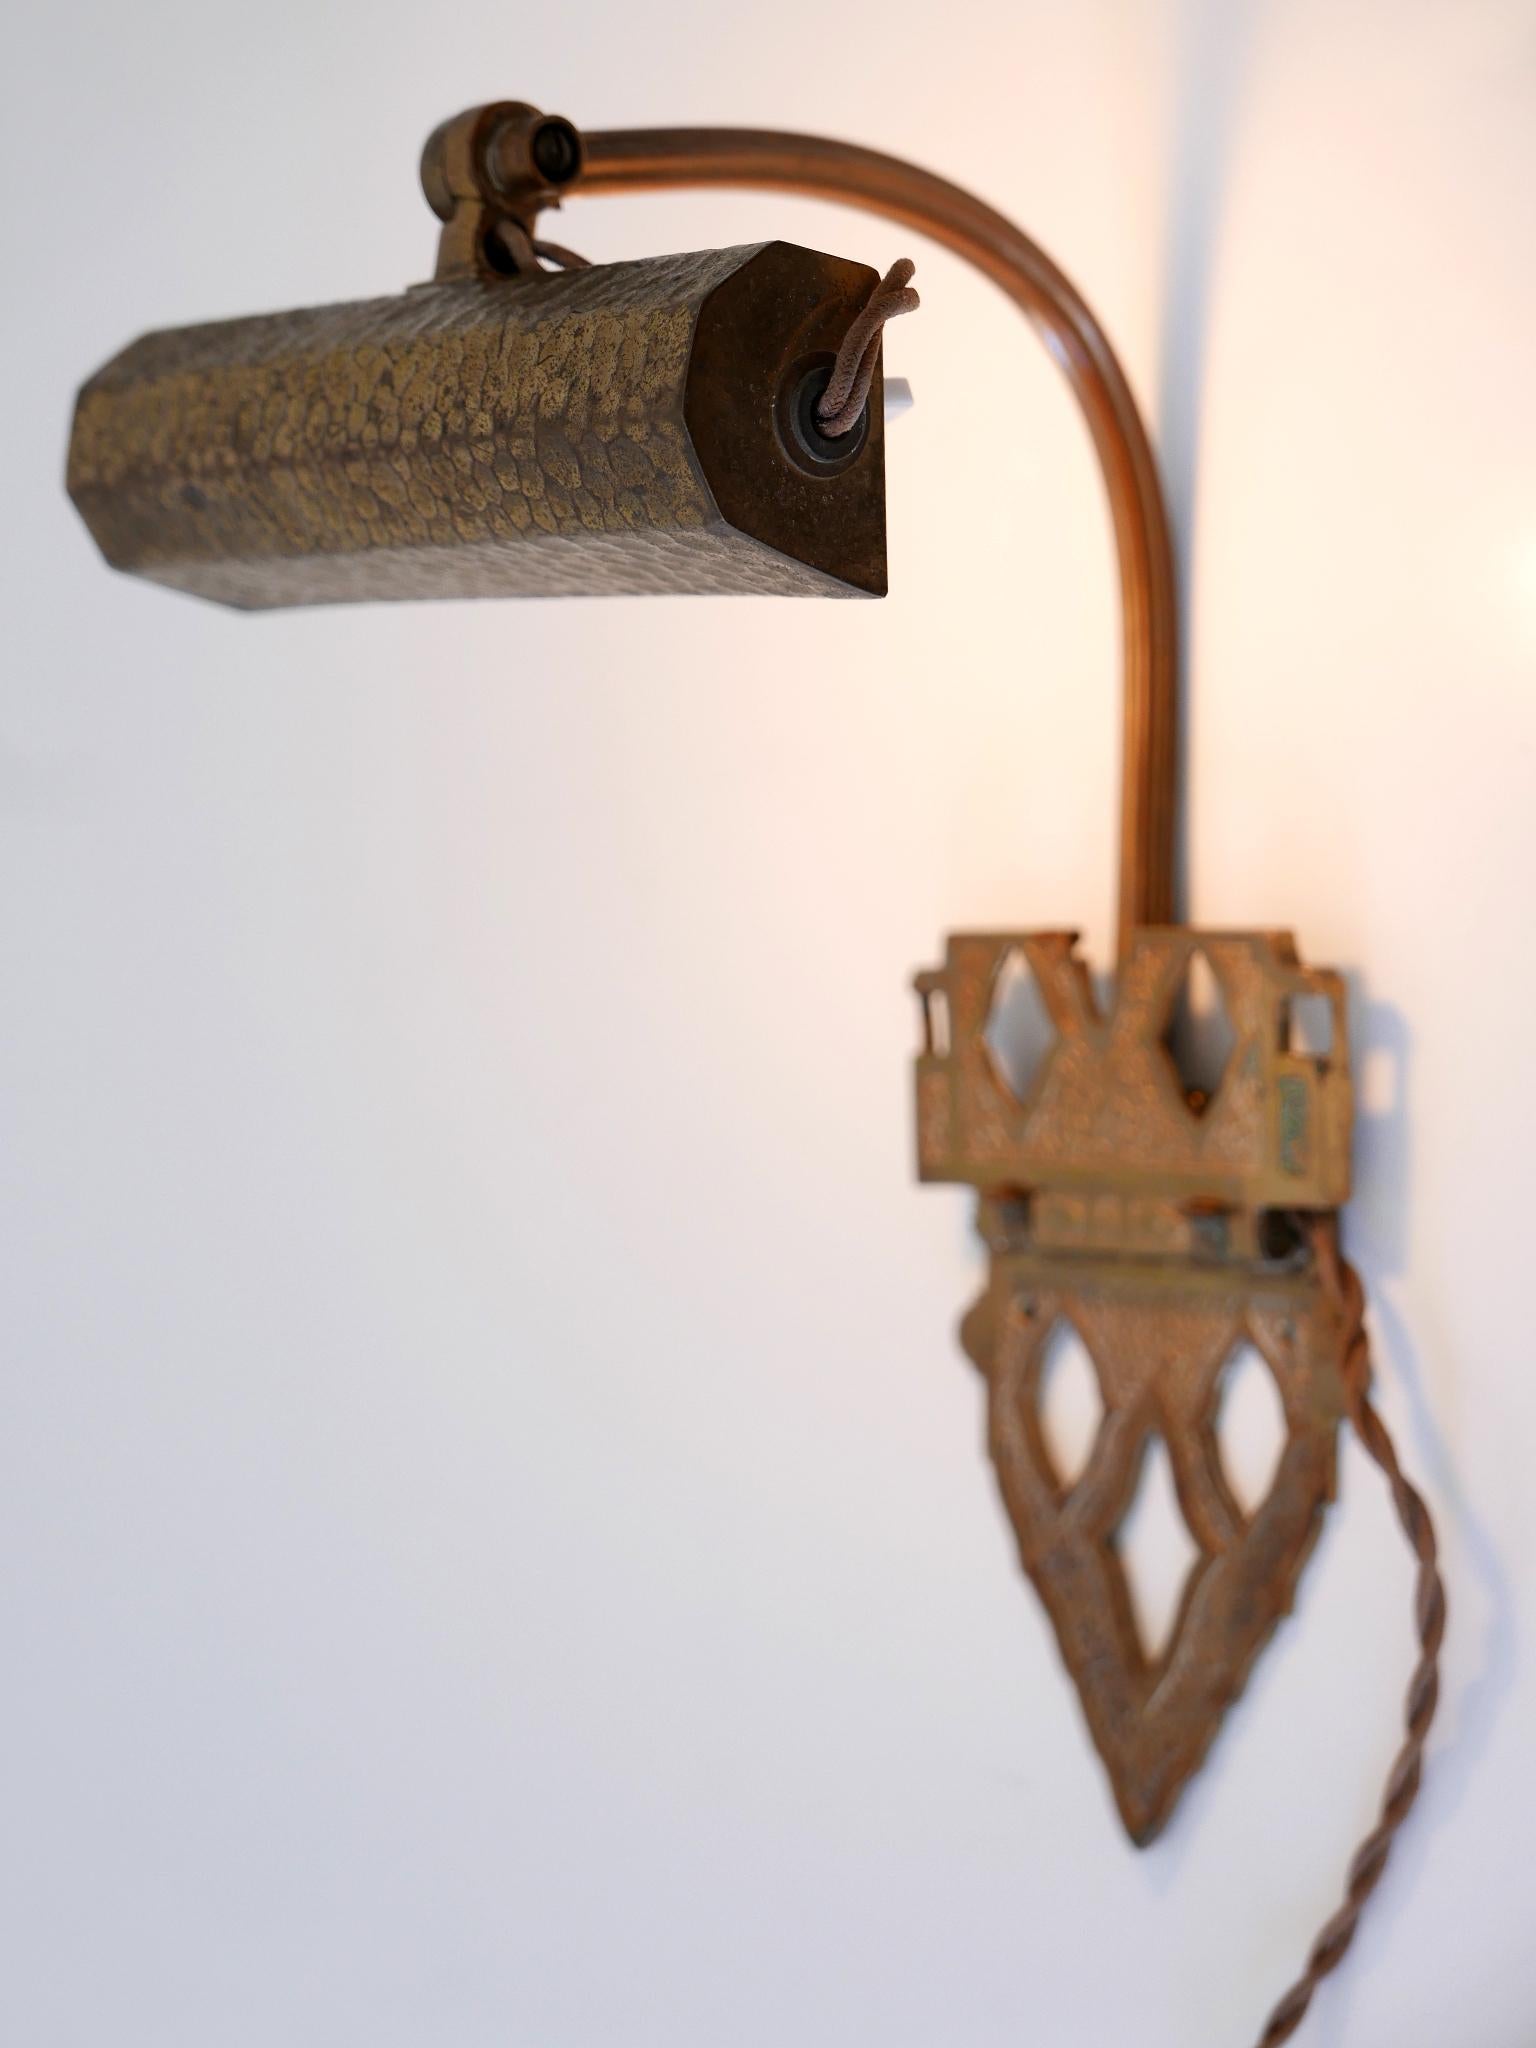 Rare & Elegant Art Nouveau Hammered Brass Sconce or Wall Lamp Germany 1900s For Sale 2